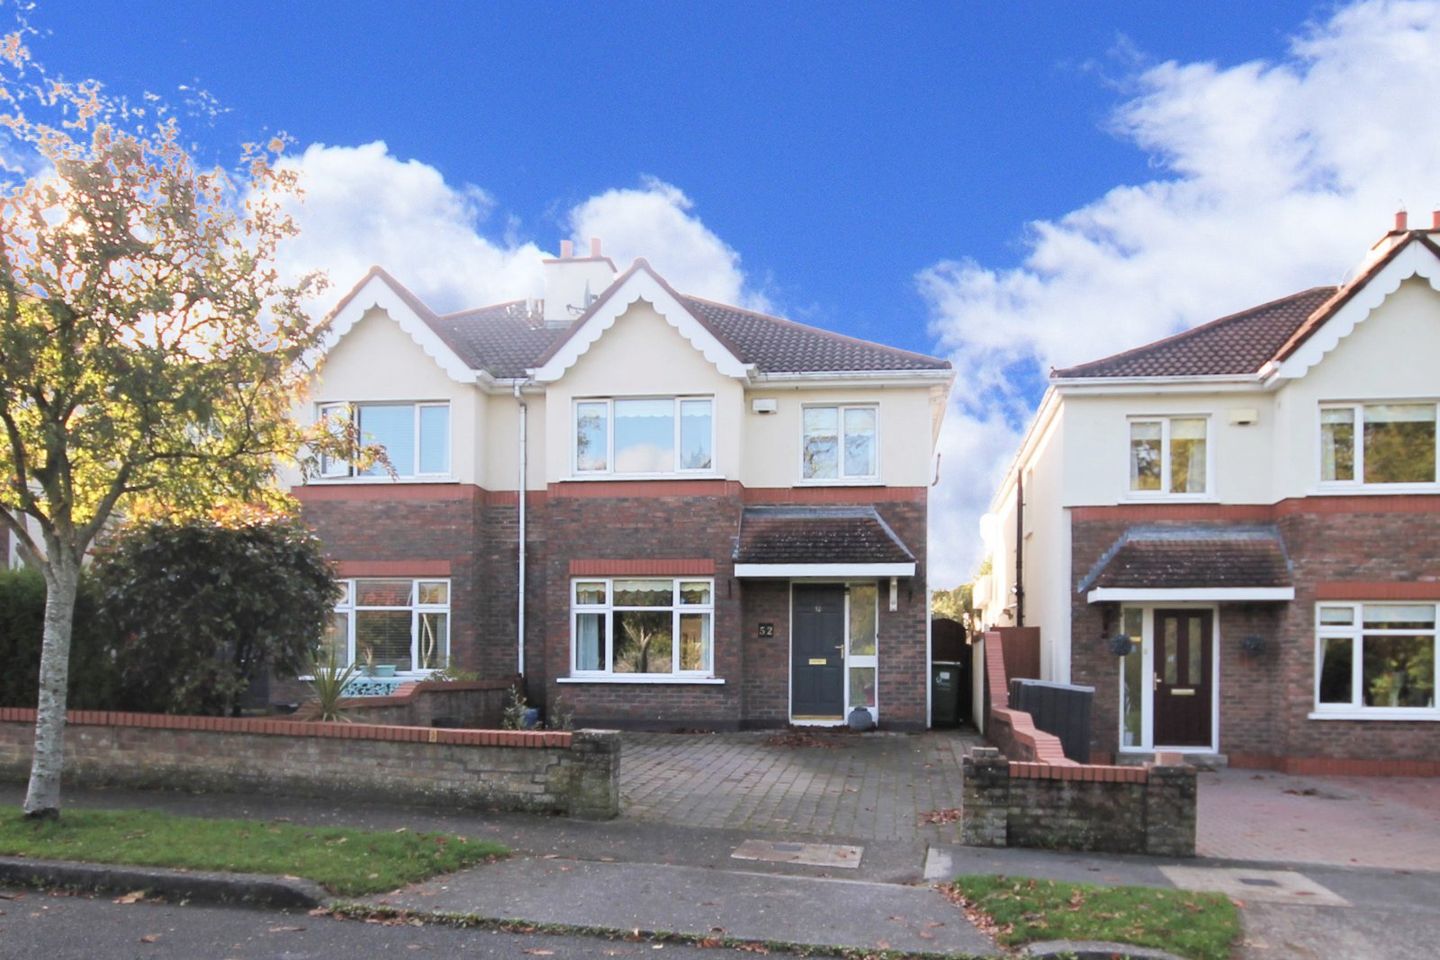 52 Giltspur Wood, Bray, Co. Wicklow